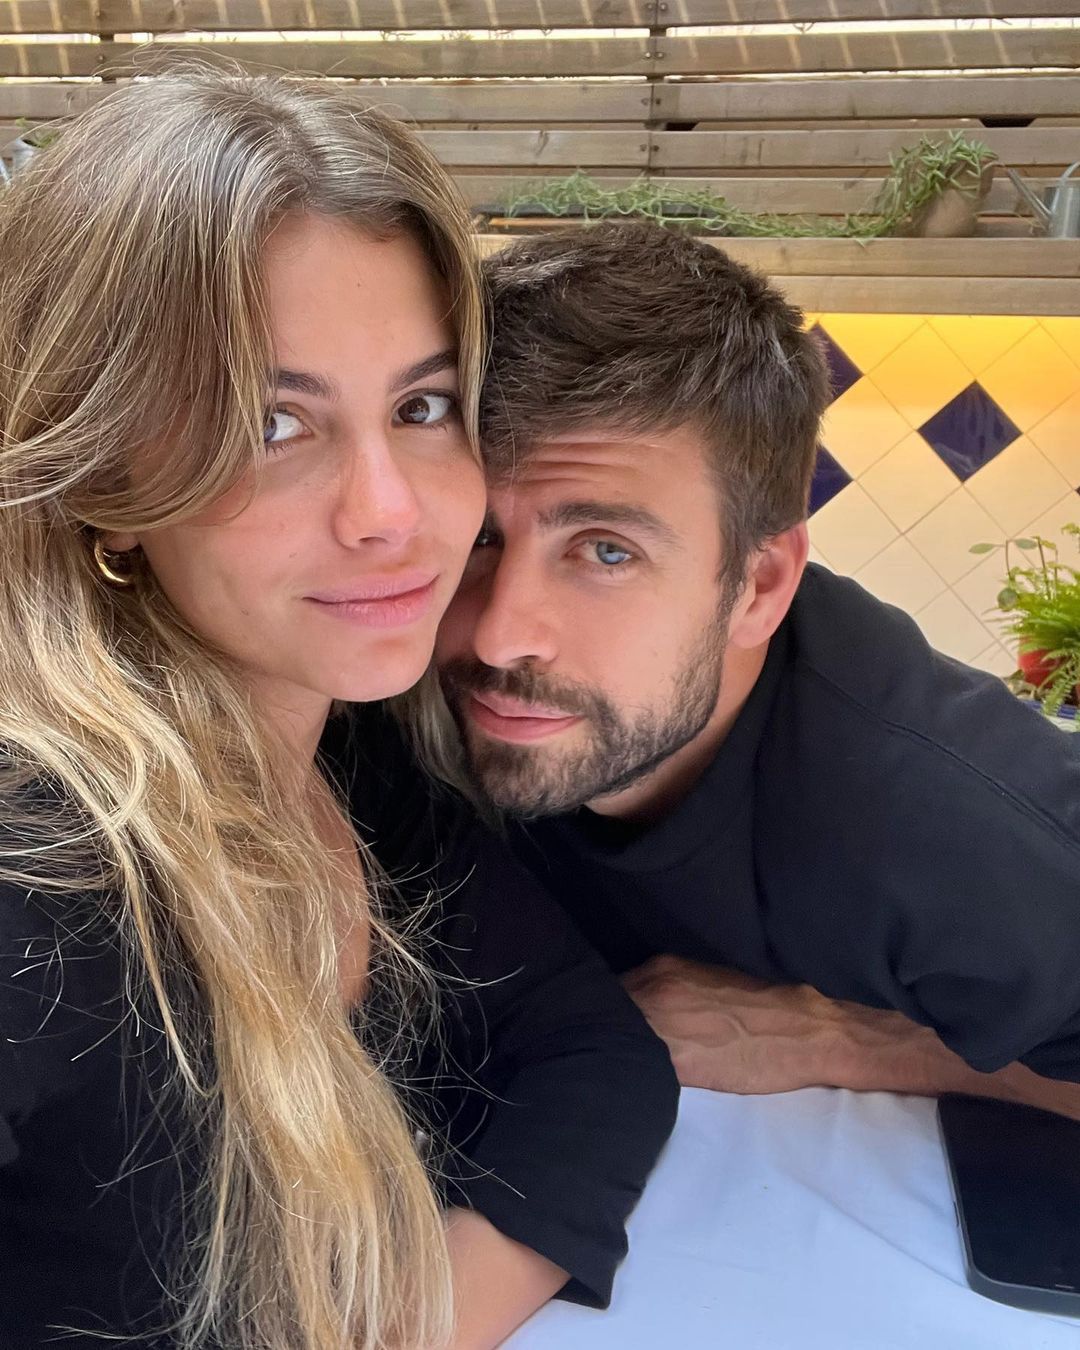 Instagram selfie of Gerard Pique and his young lover